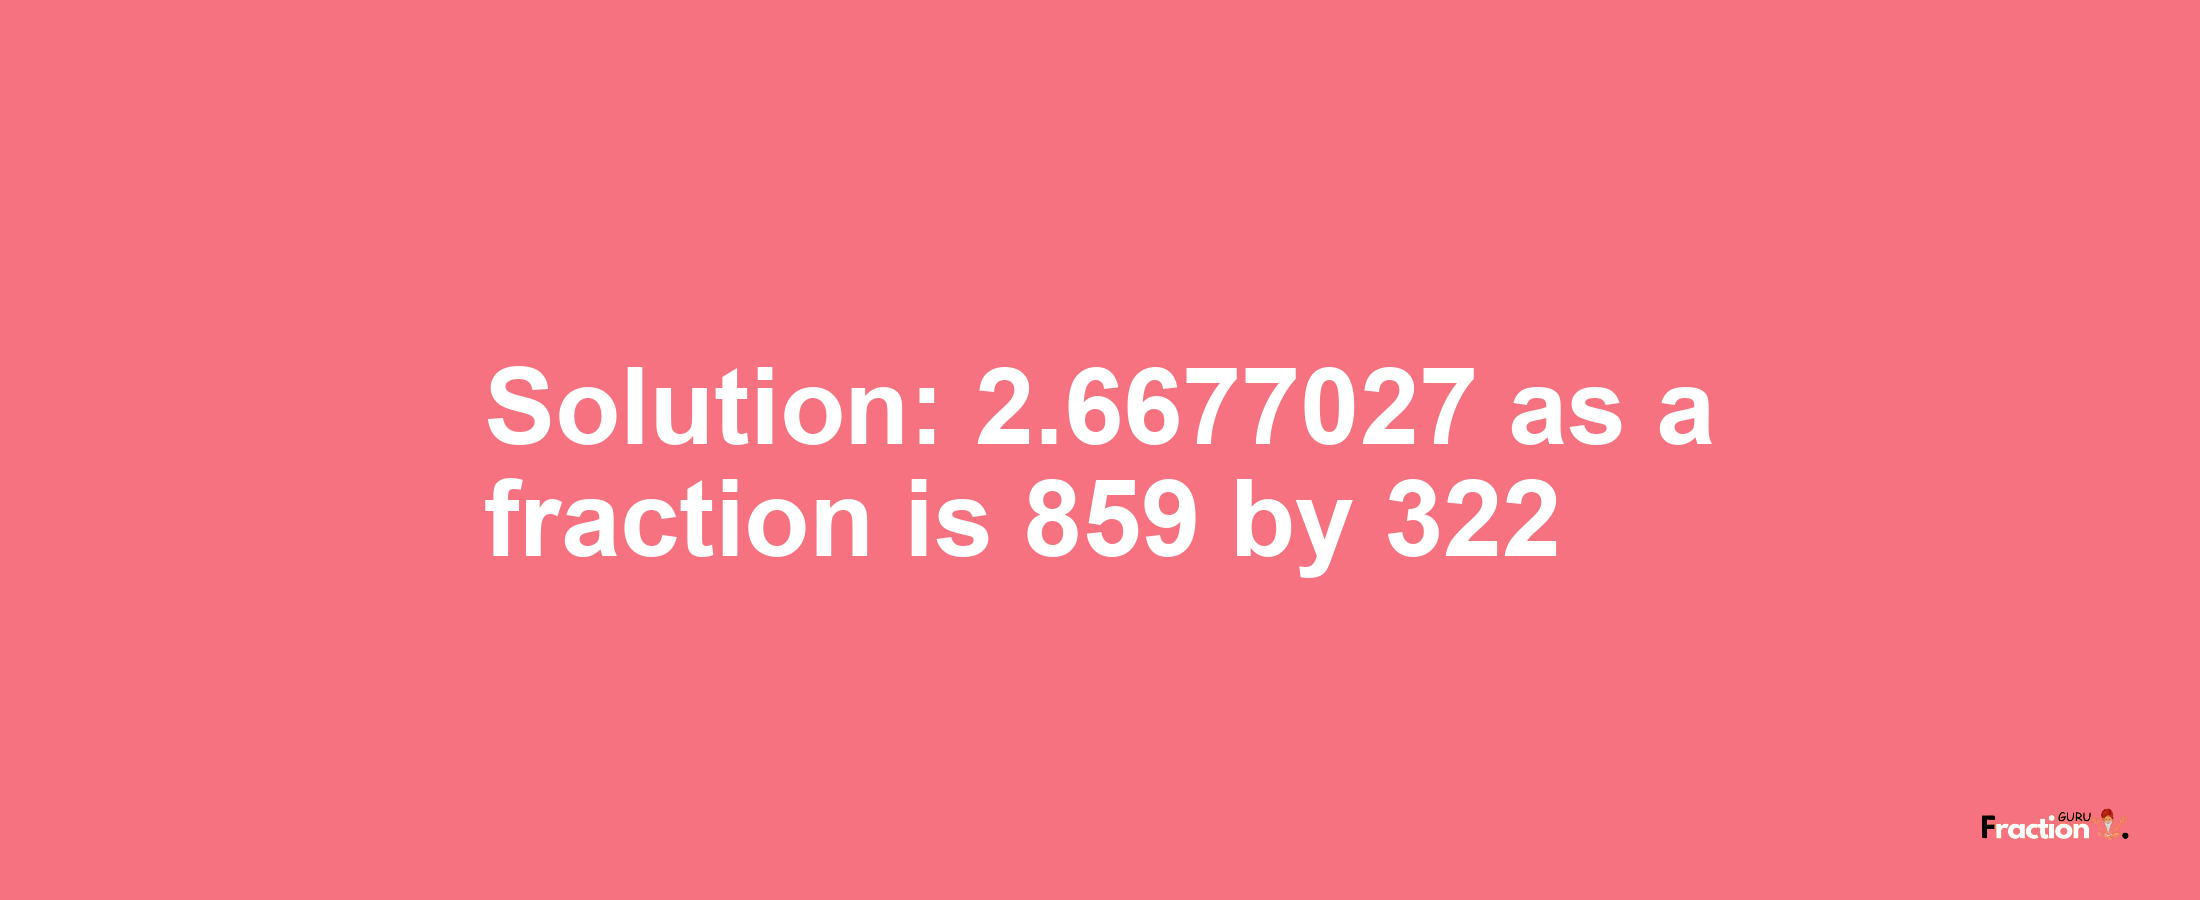 Solution:2.6677027 as a fraction is 859/322